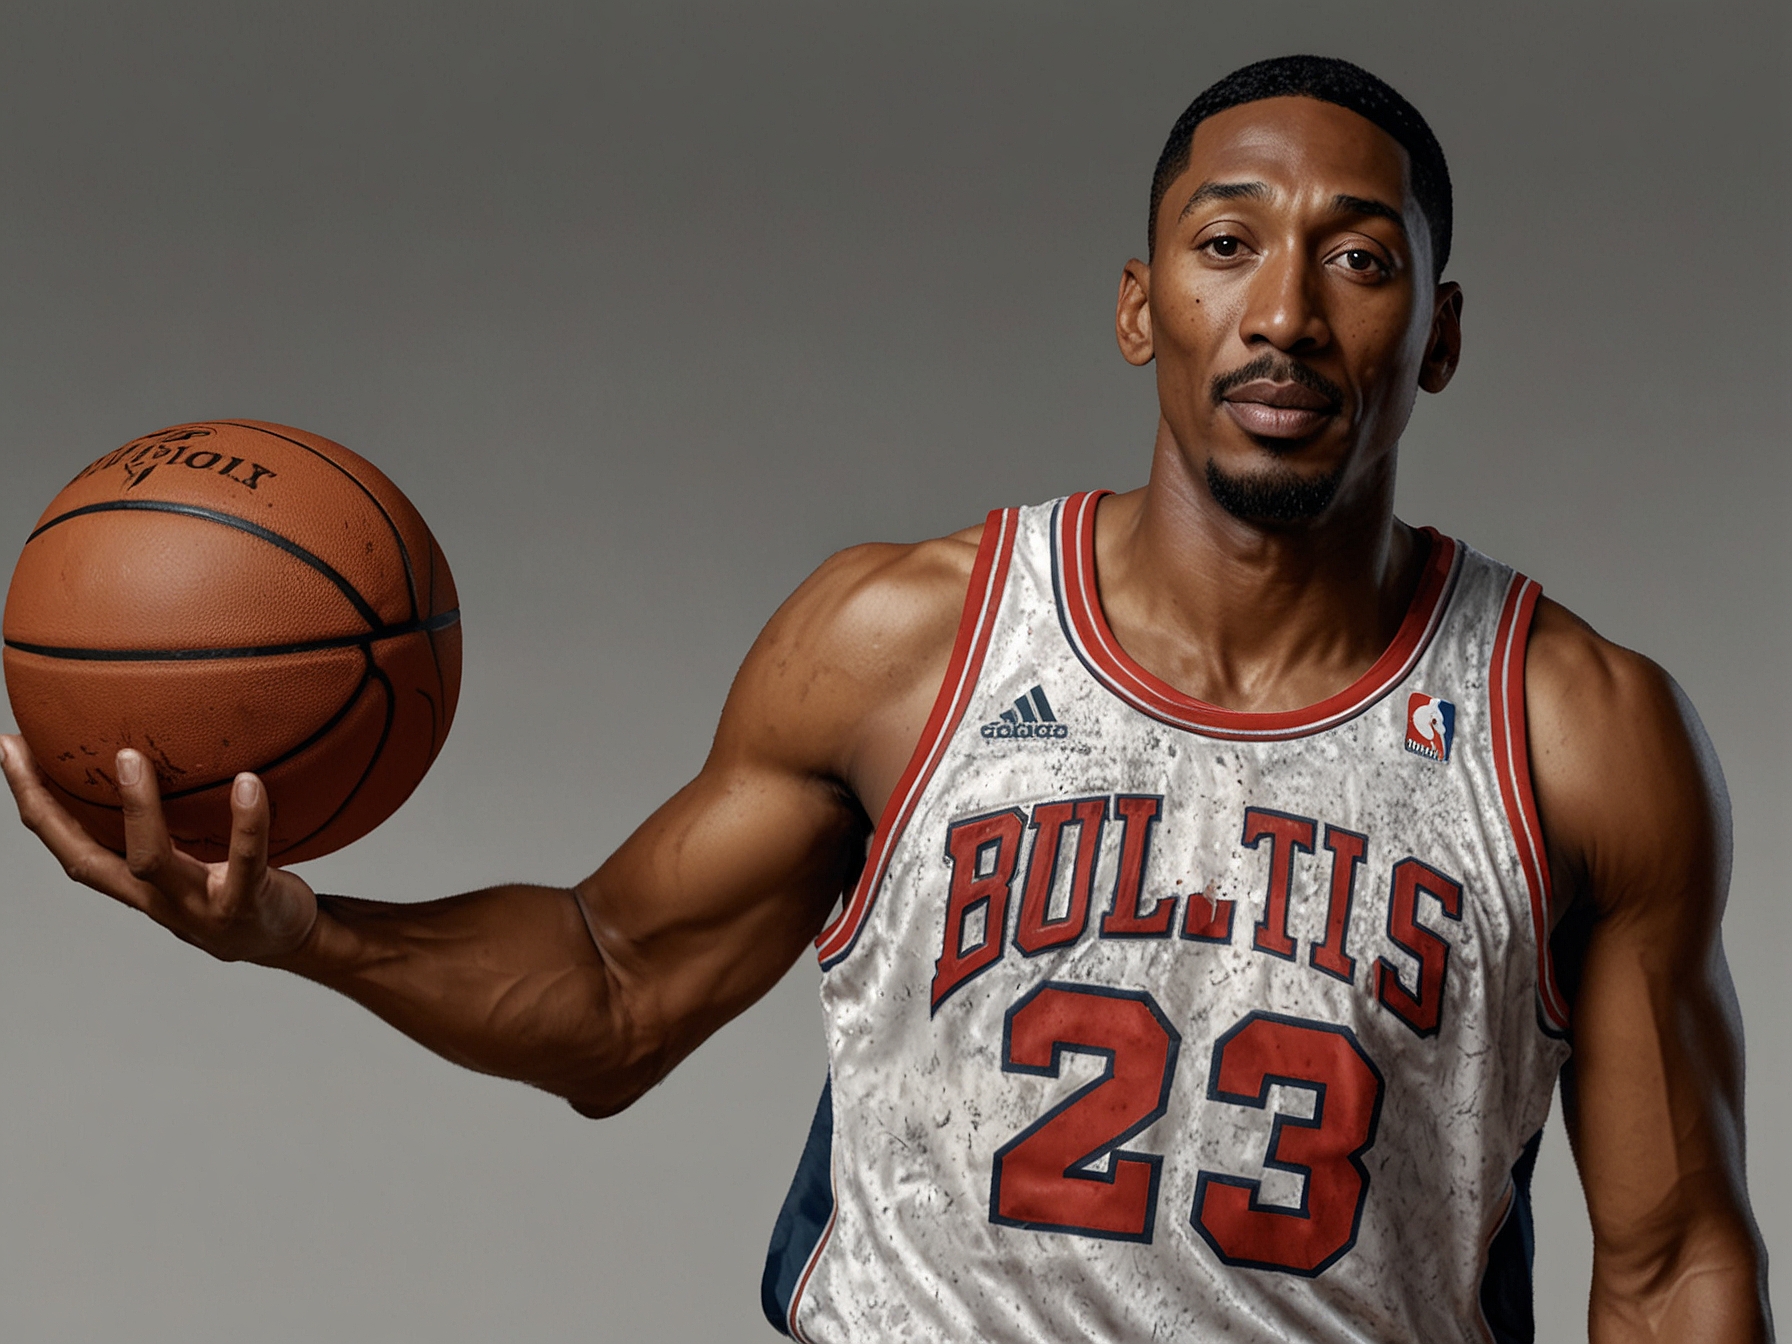 A portrait of Scottie Pippen holding a basketball, emphasizing his versatile skills, leadership, and accomplishments, including his MVP performance in the 1994 NBA All-Star Game and his induction into the Basketball Hall of Fame.